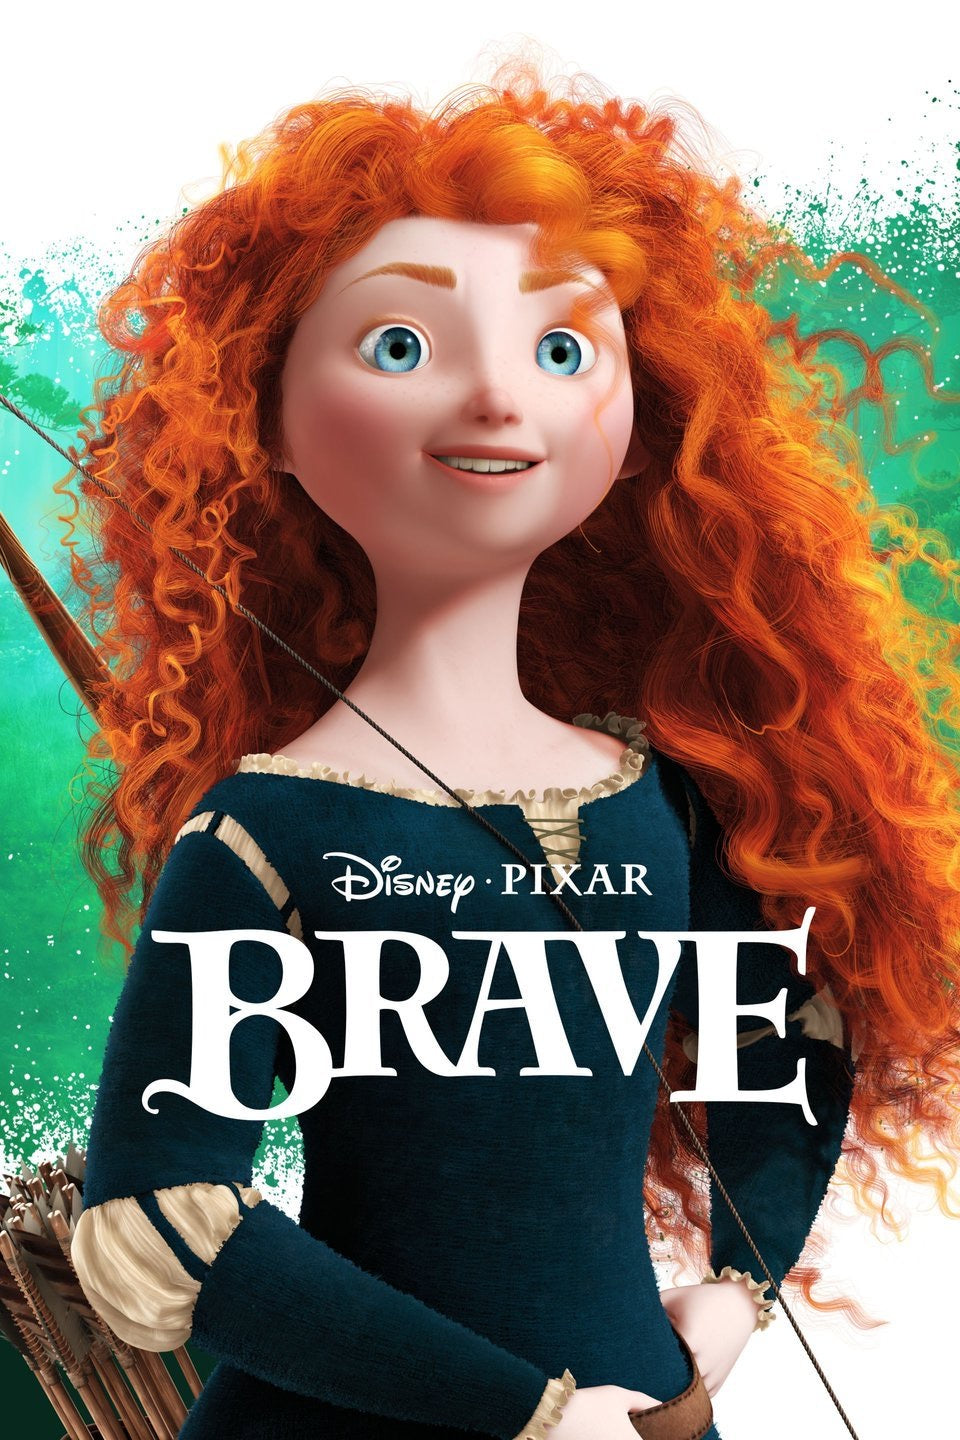 Brave (2012) Vudu or Movies Anywhere HD redemption only